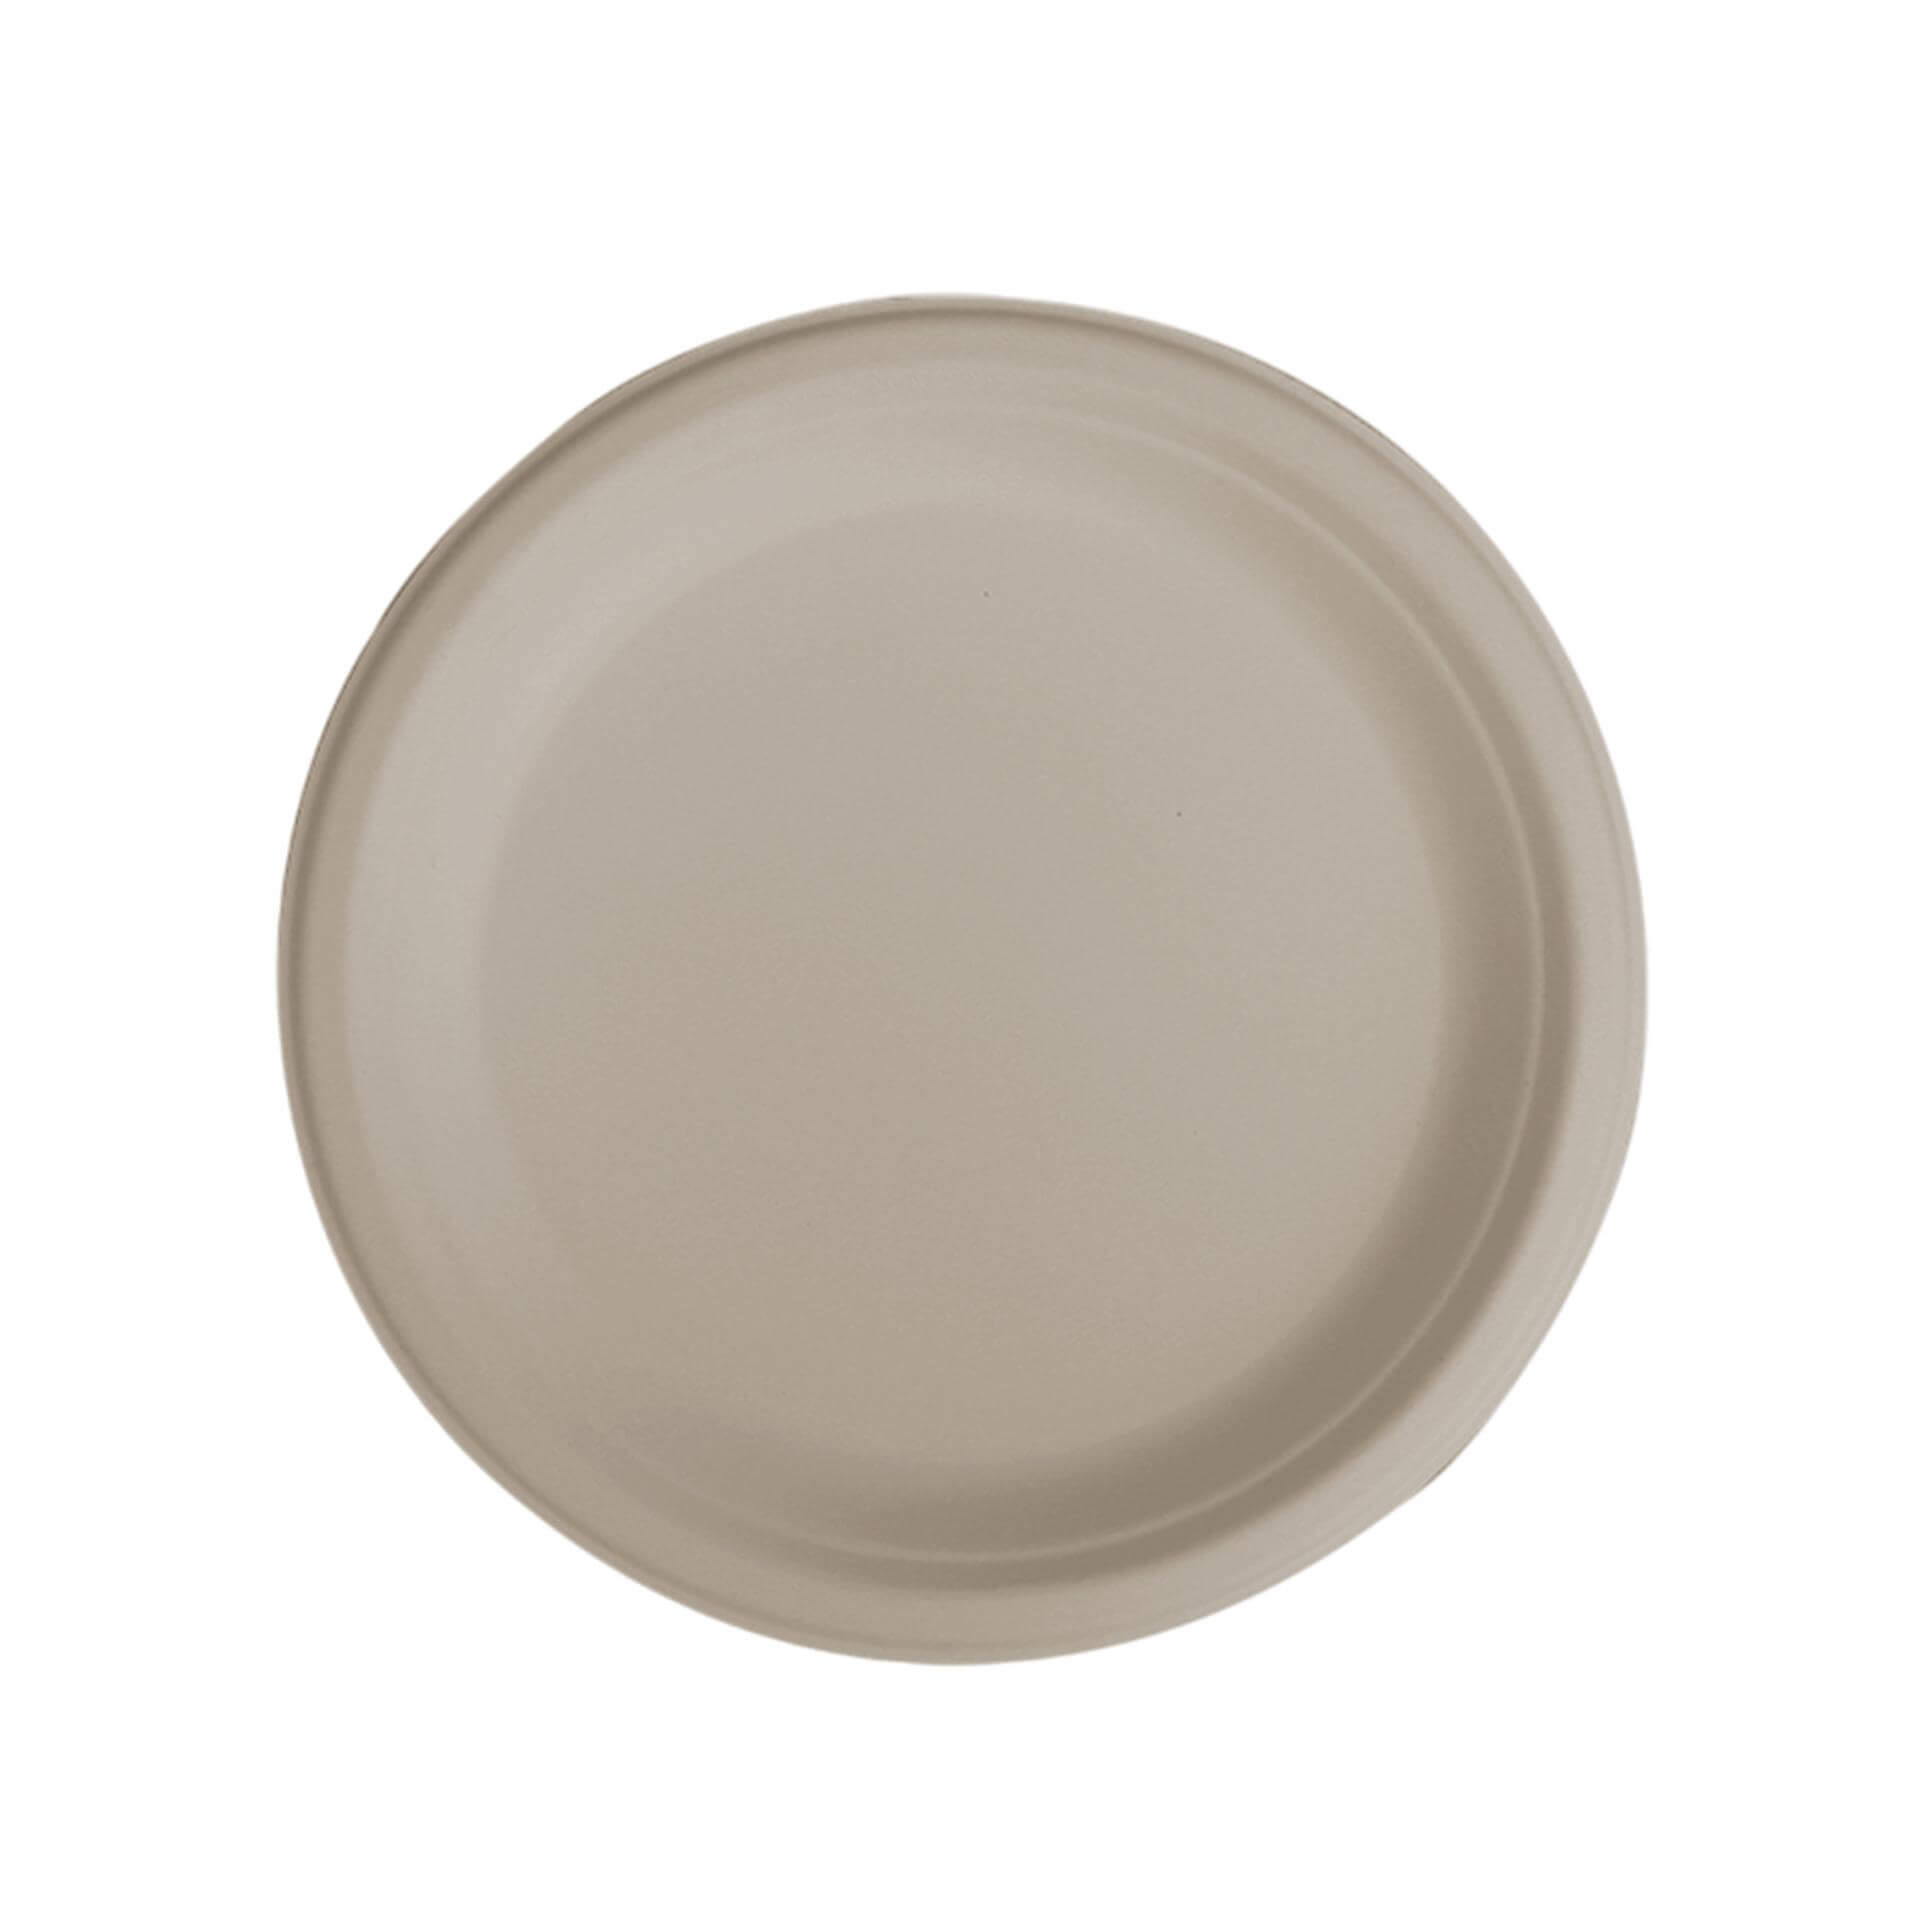 biodegradable plates and utensils